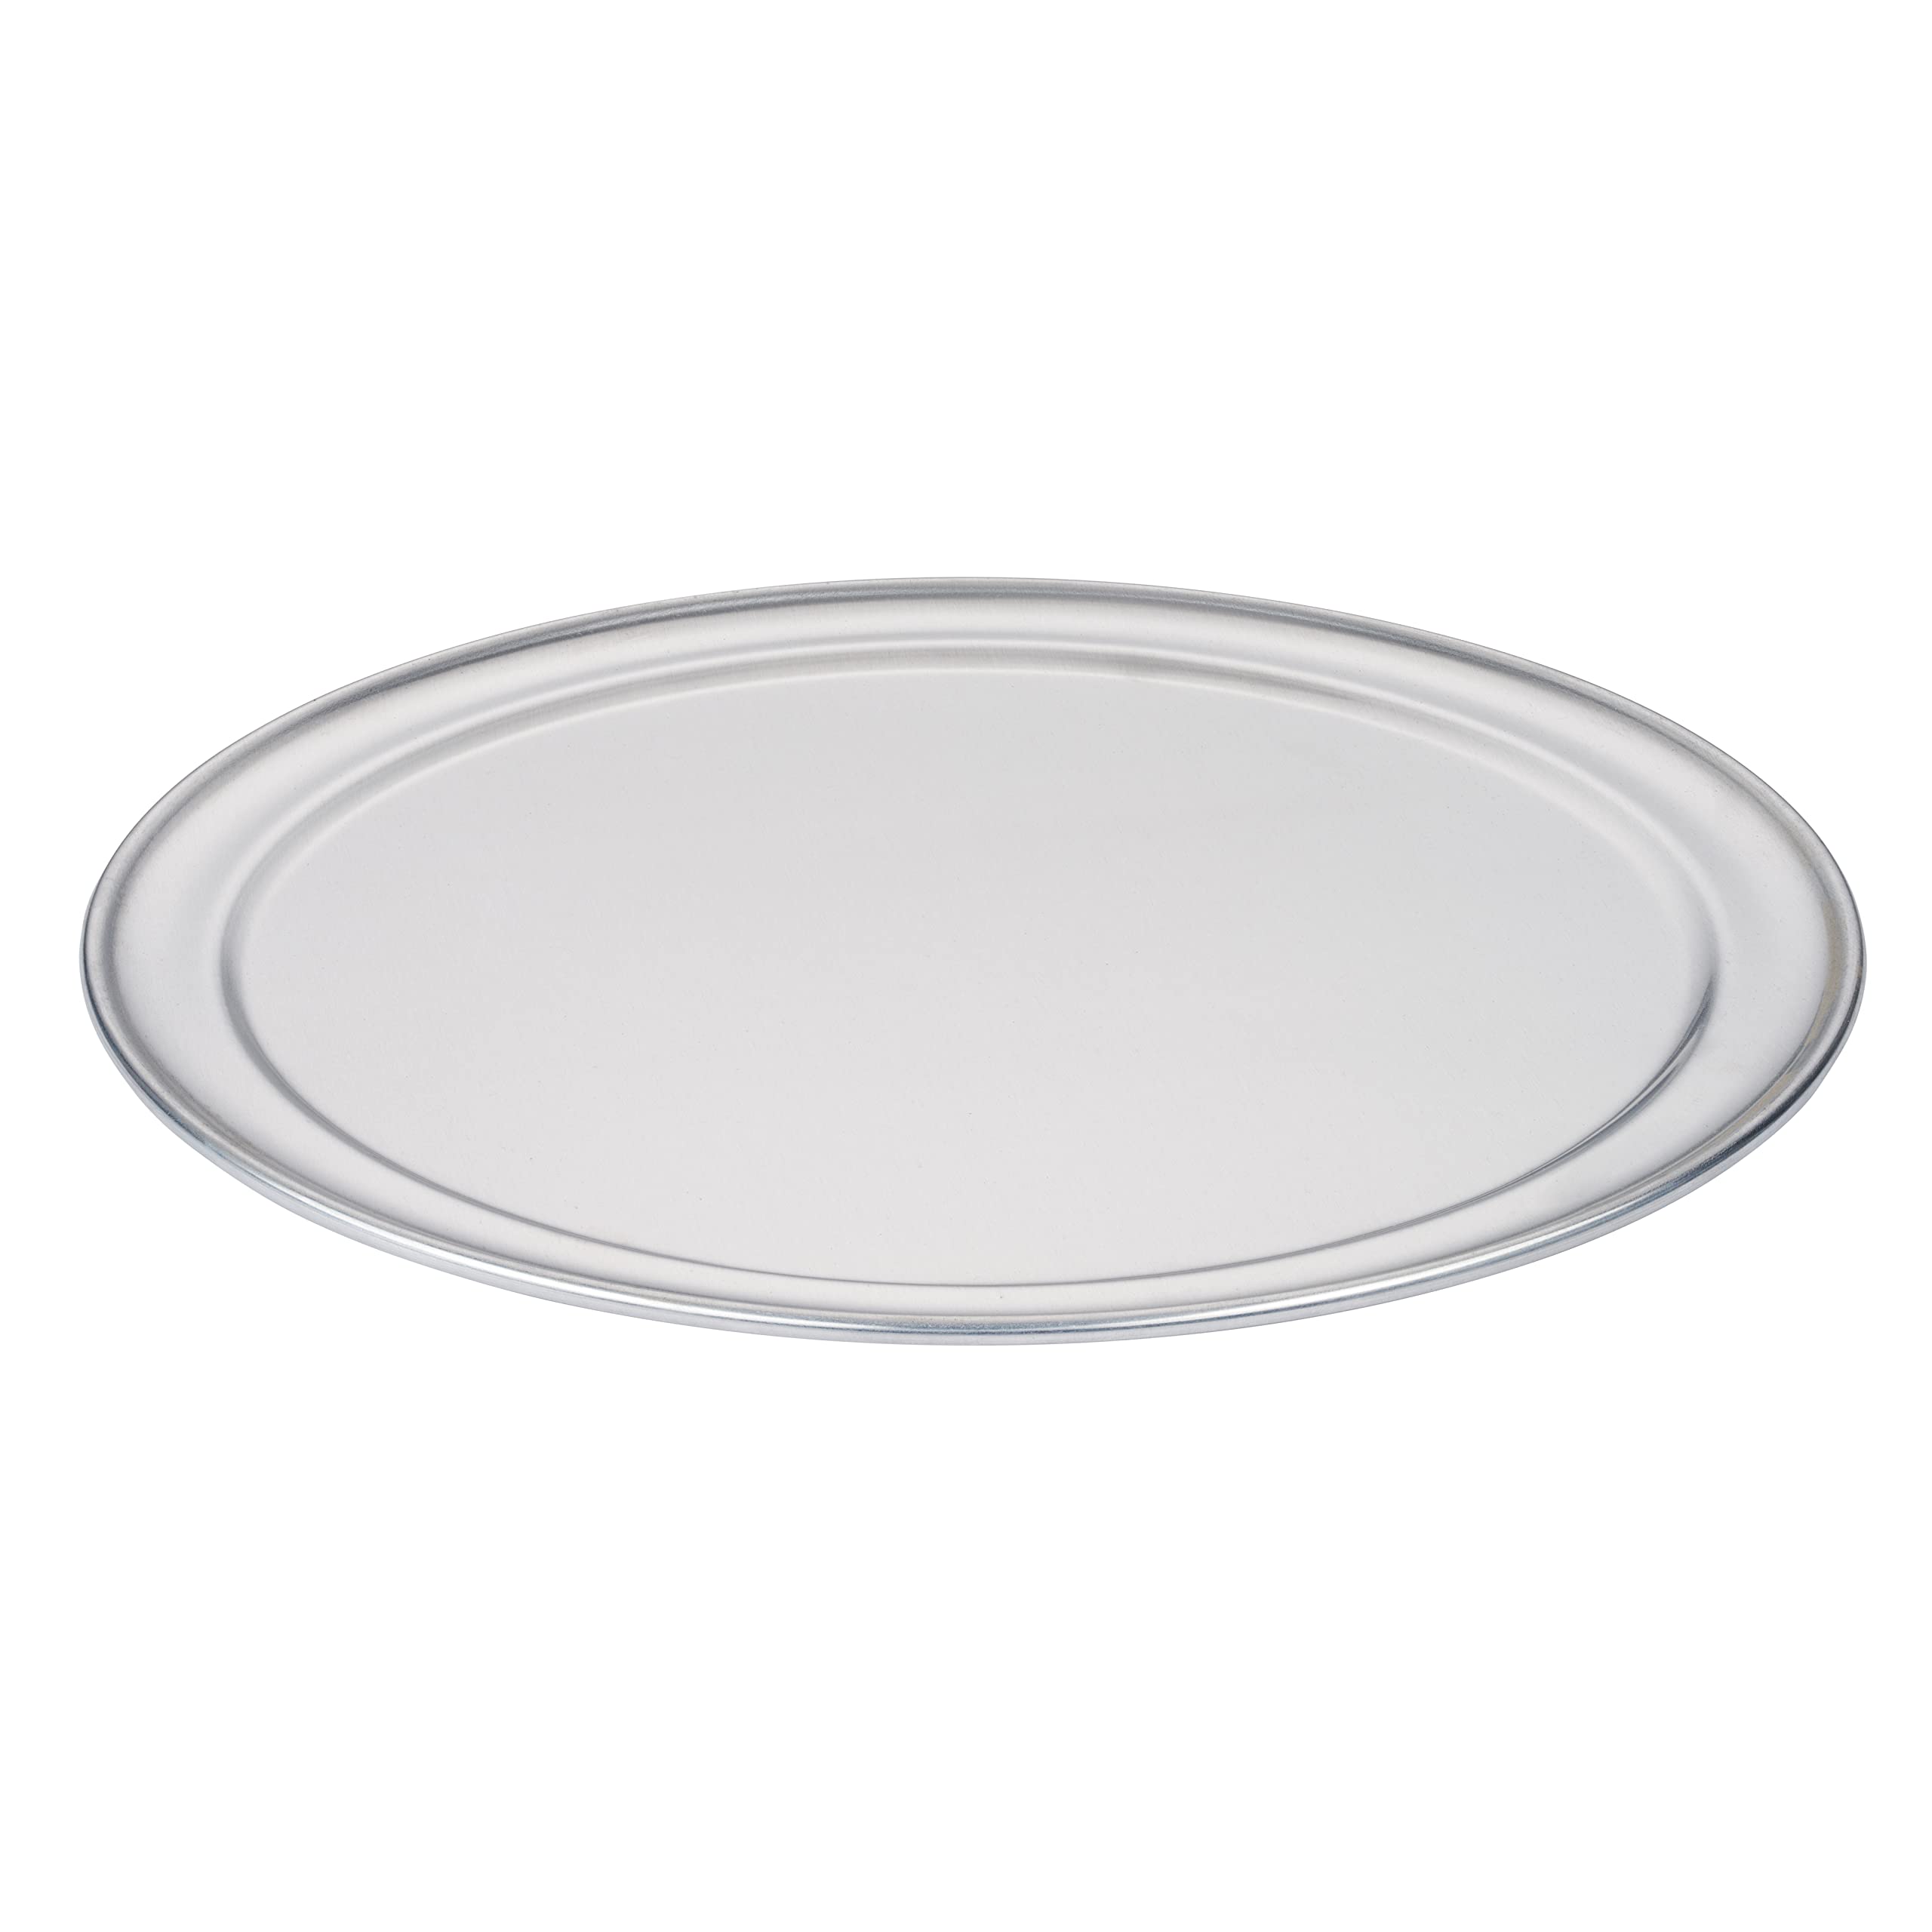 Norjac Wide-Rim Pizza Pan, 10 Inch, 6 Pack, Restaurant-Grade, 100% Solid Aluminum, Baking Pan, Oven-Safe, Rust-Free.